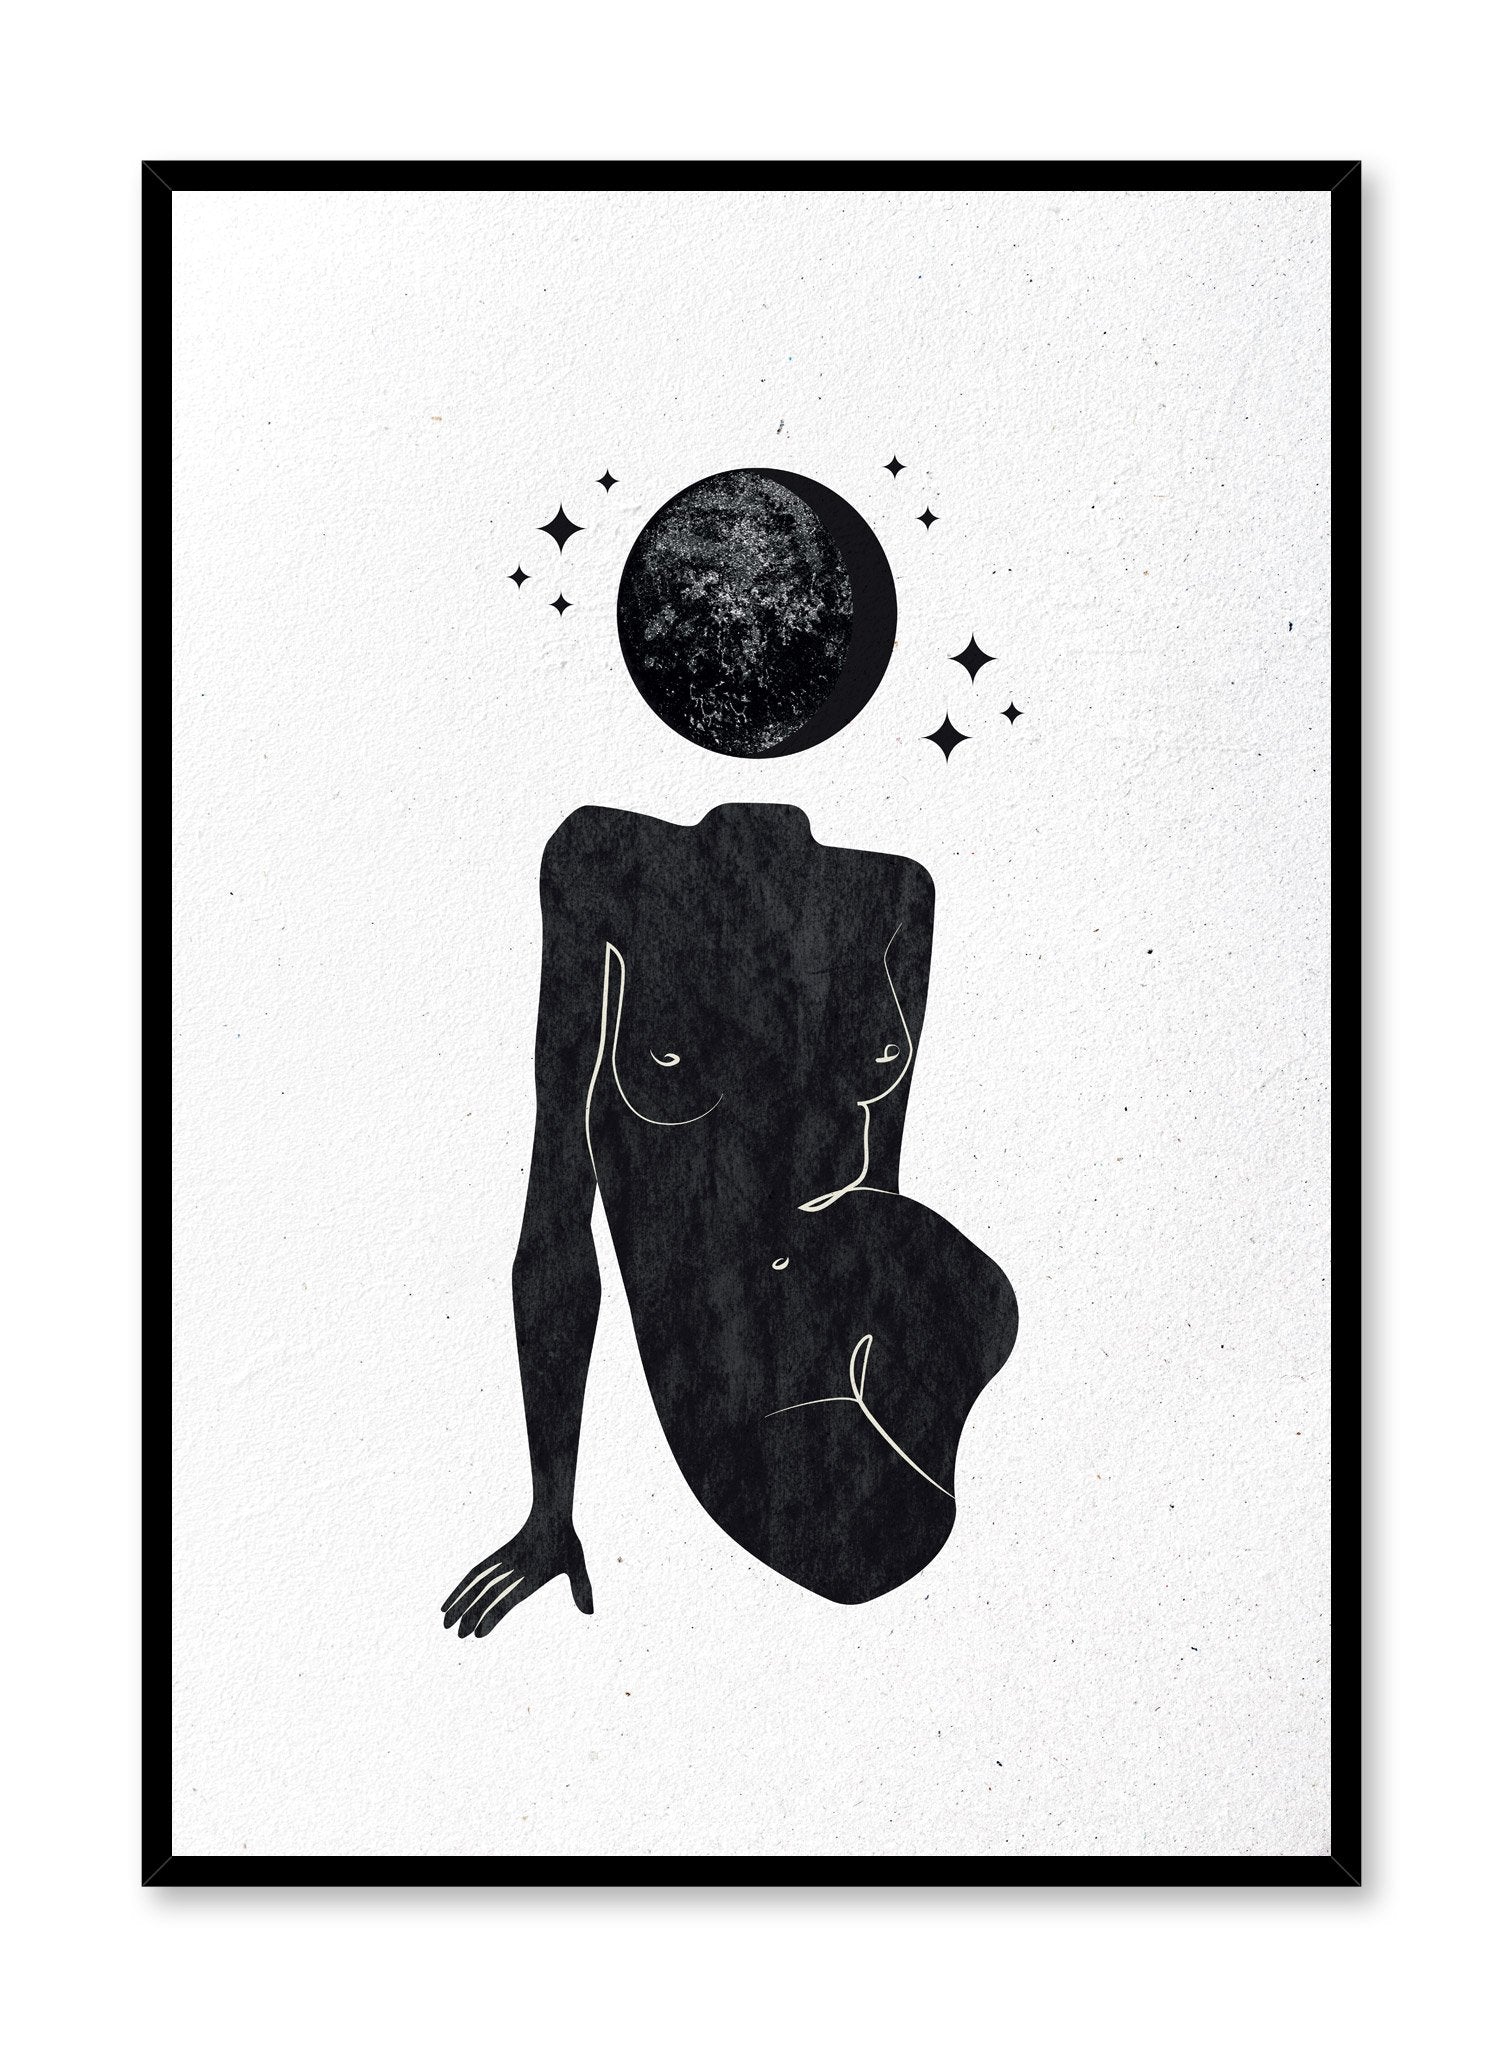 Celestial illustration poster by Opposite Wall with abstract planet on woman body